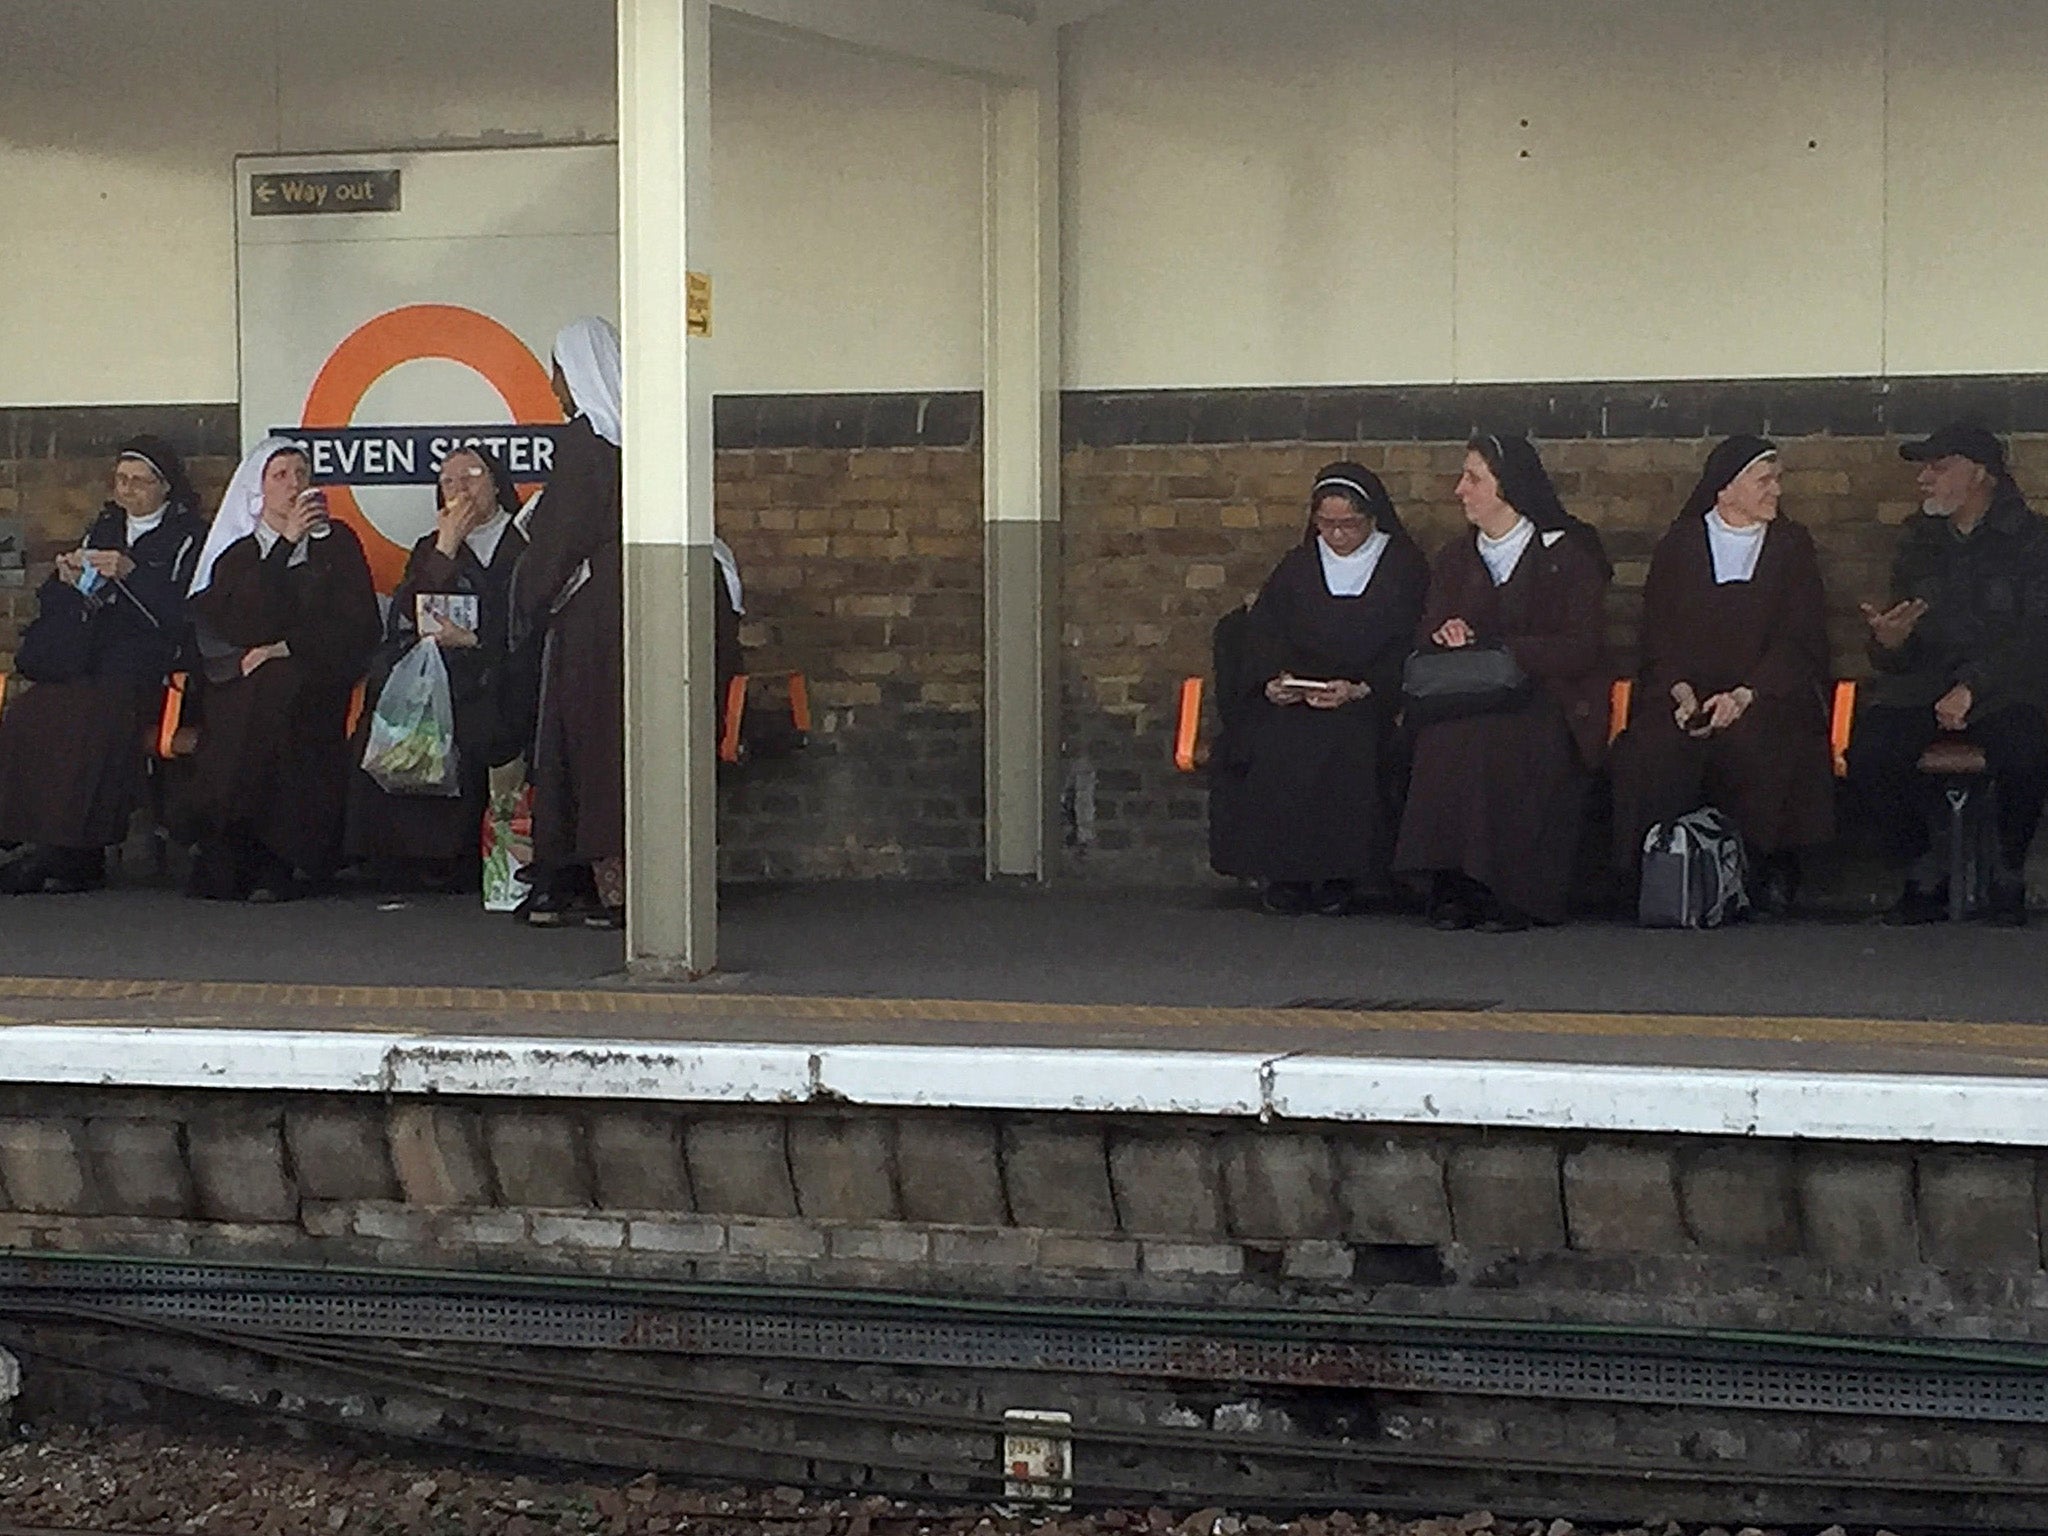 A bemused commuter managed to snap this photo of the seven nuns sitting by the station’s sign